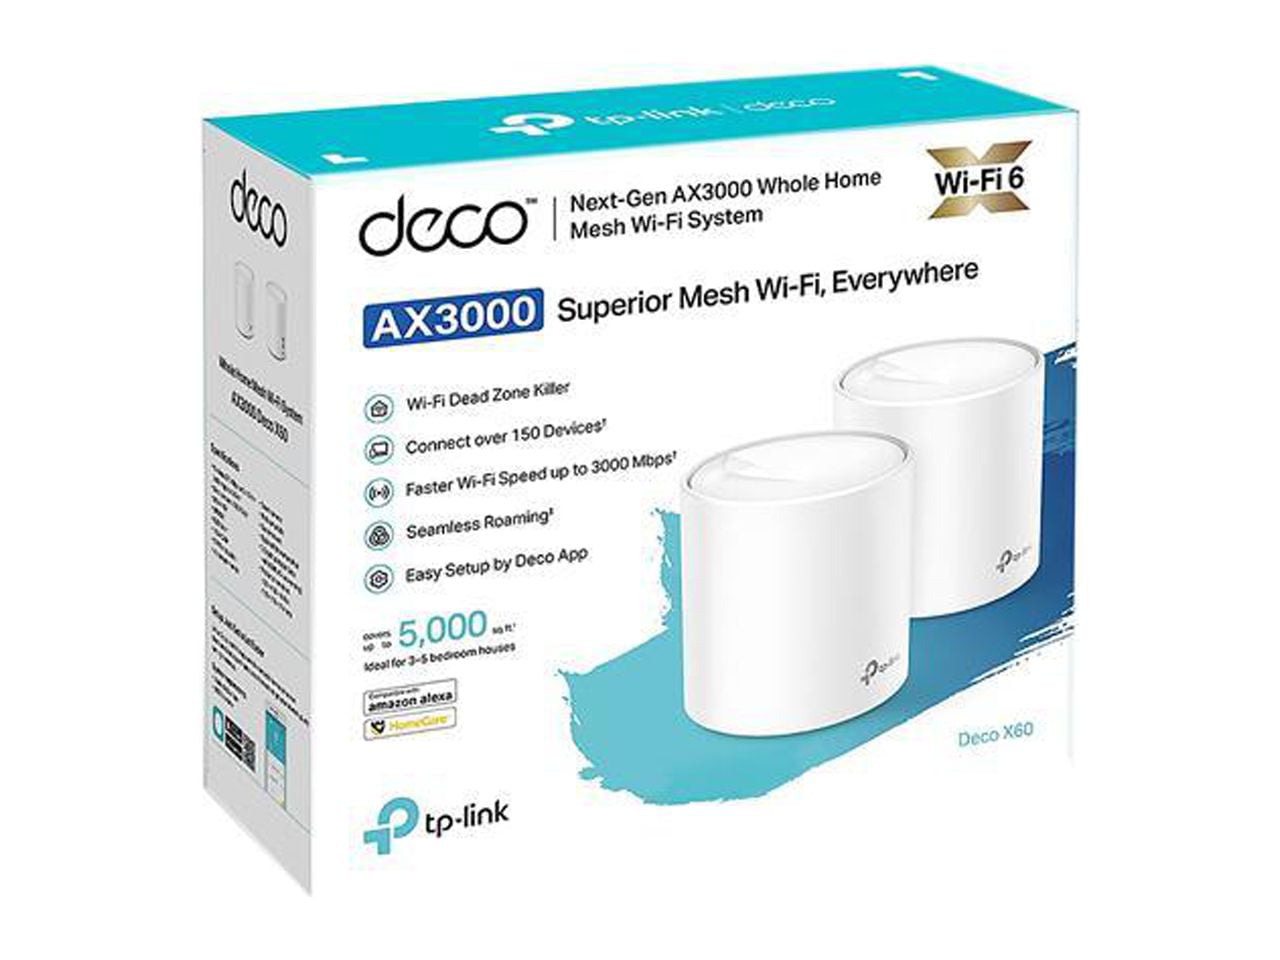 5%OFF TP-Link Deco X60 Wi-Fi6 ルーター